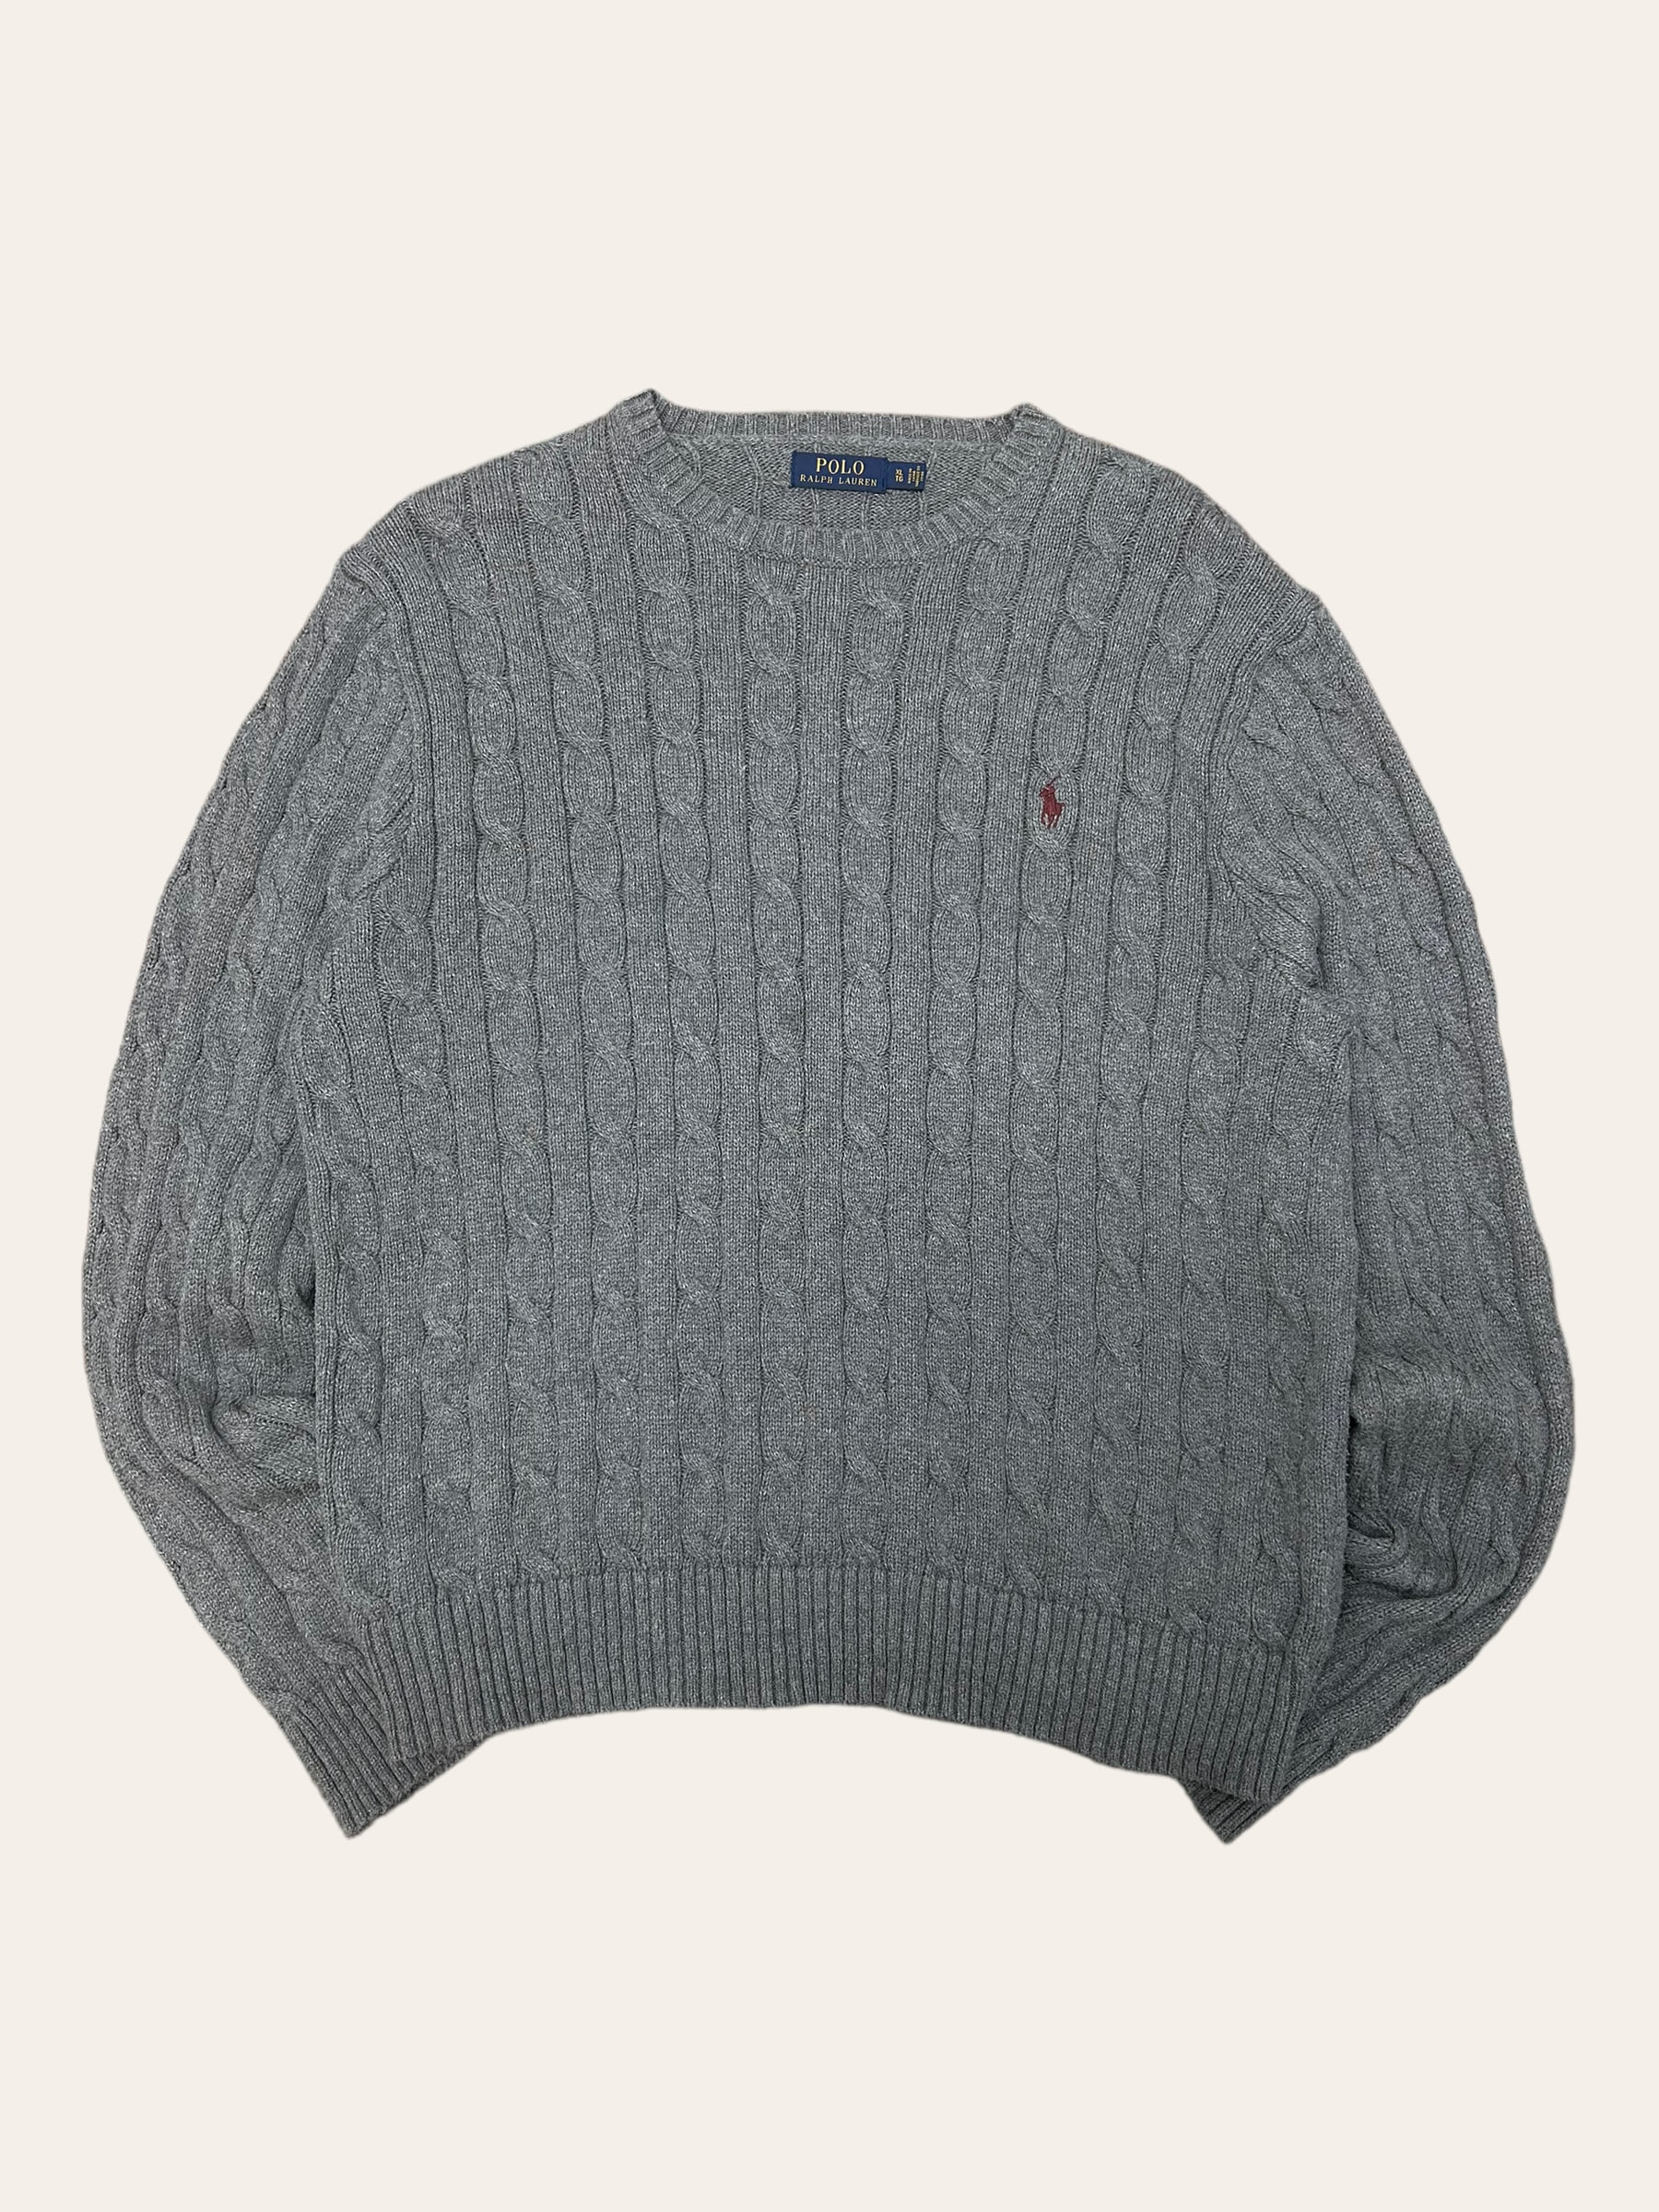 Polo ralph lauren gray cotton cable sweater XL